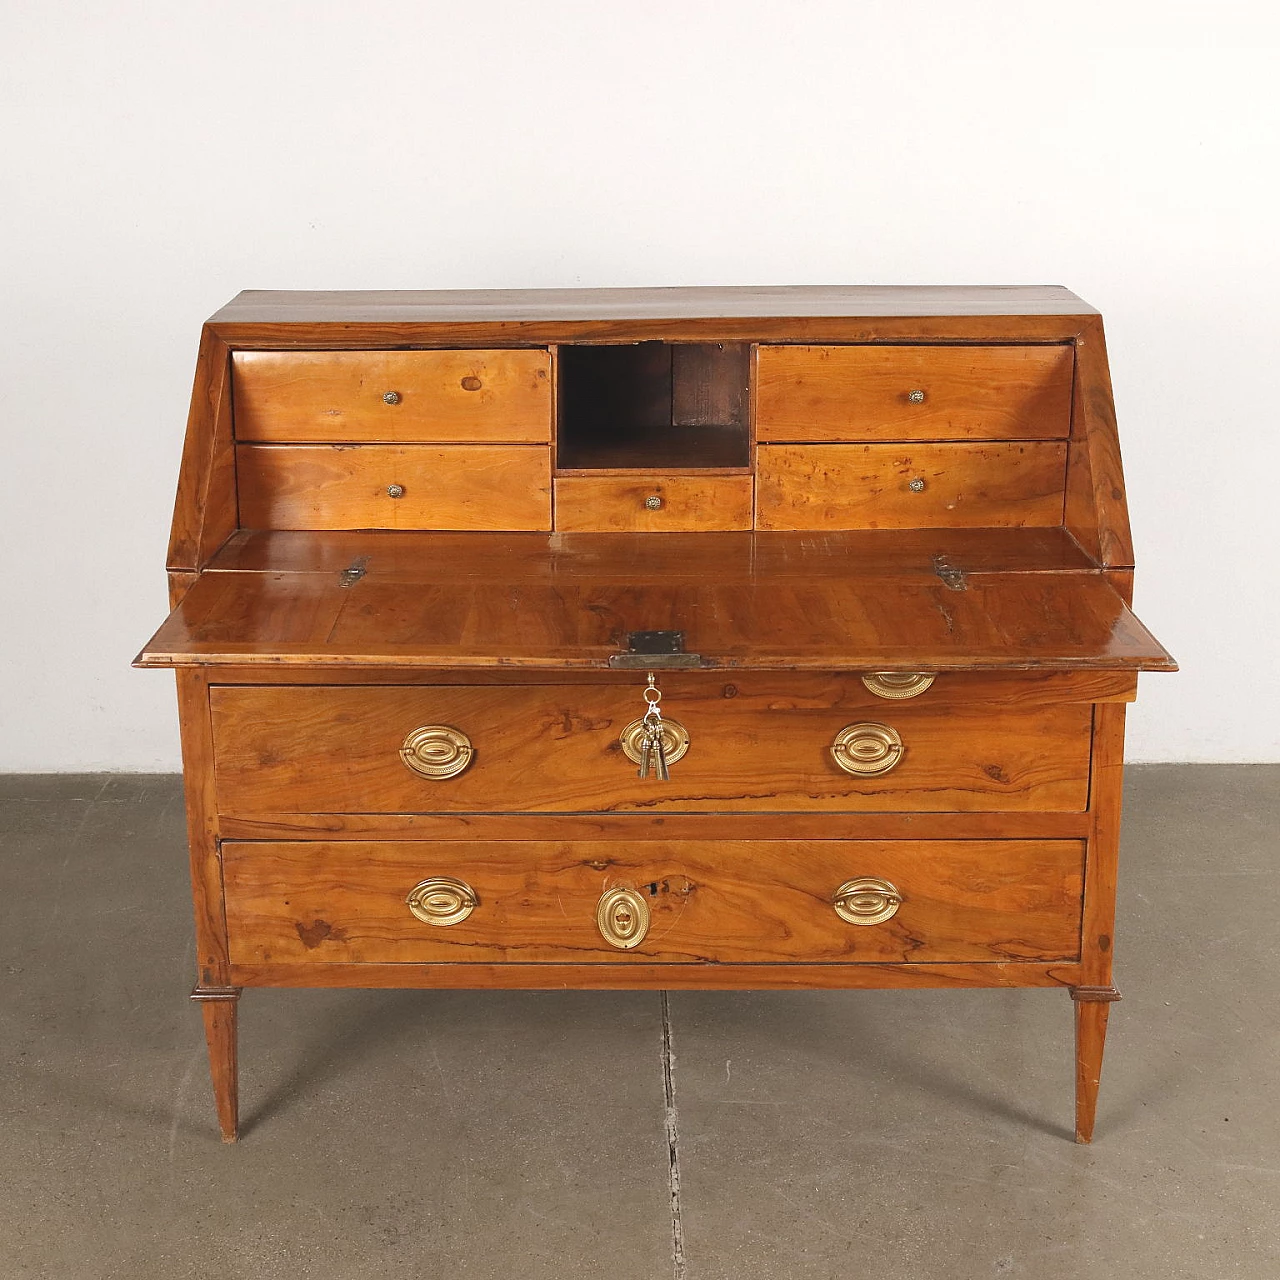 Flap desk with drawers in olive wood, 19 century 4